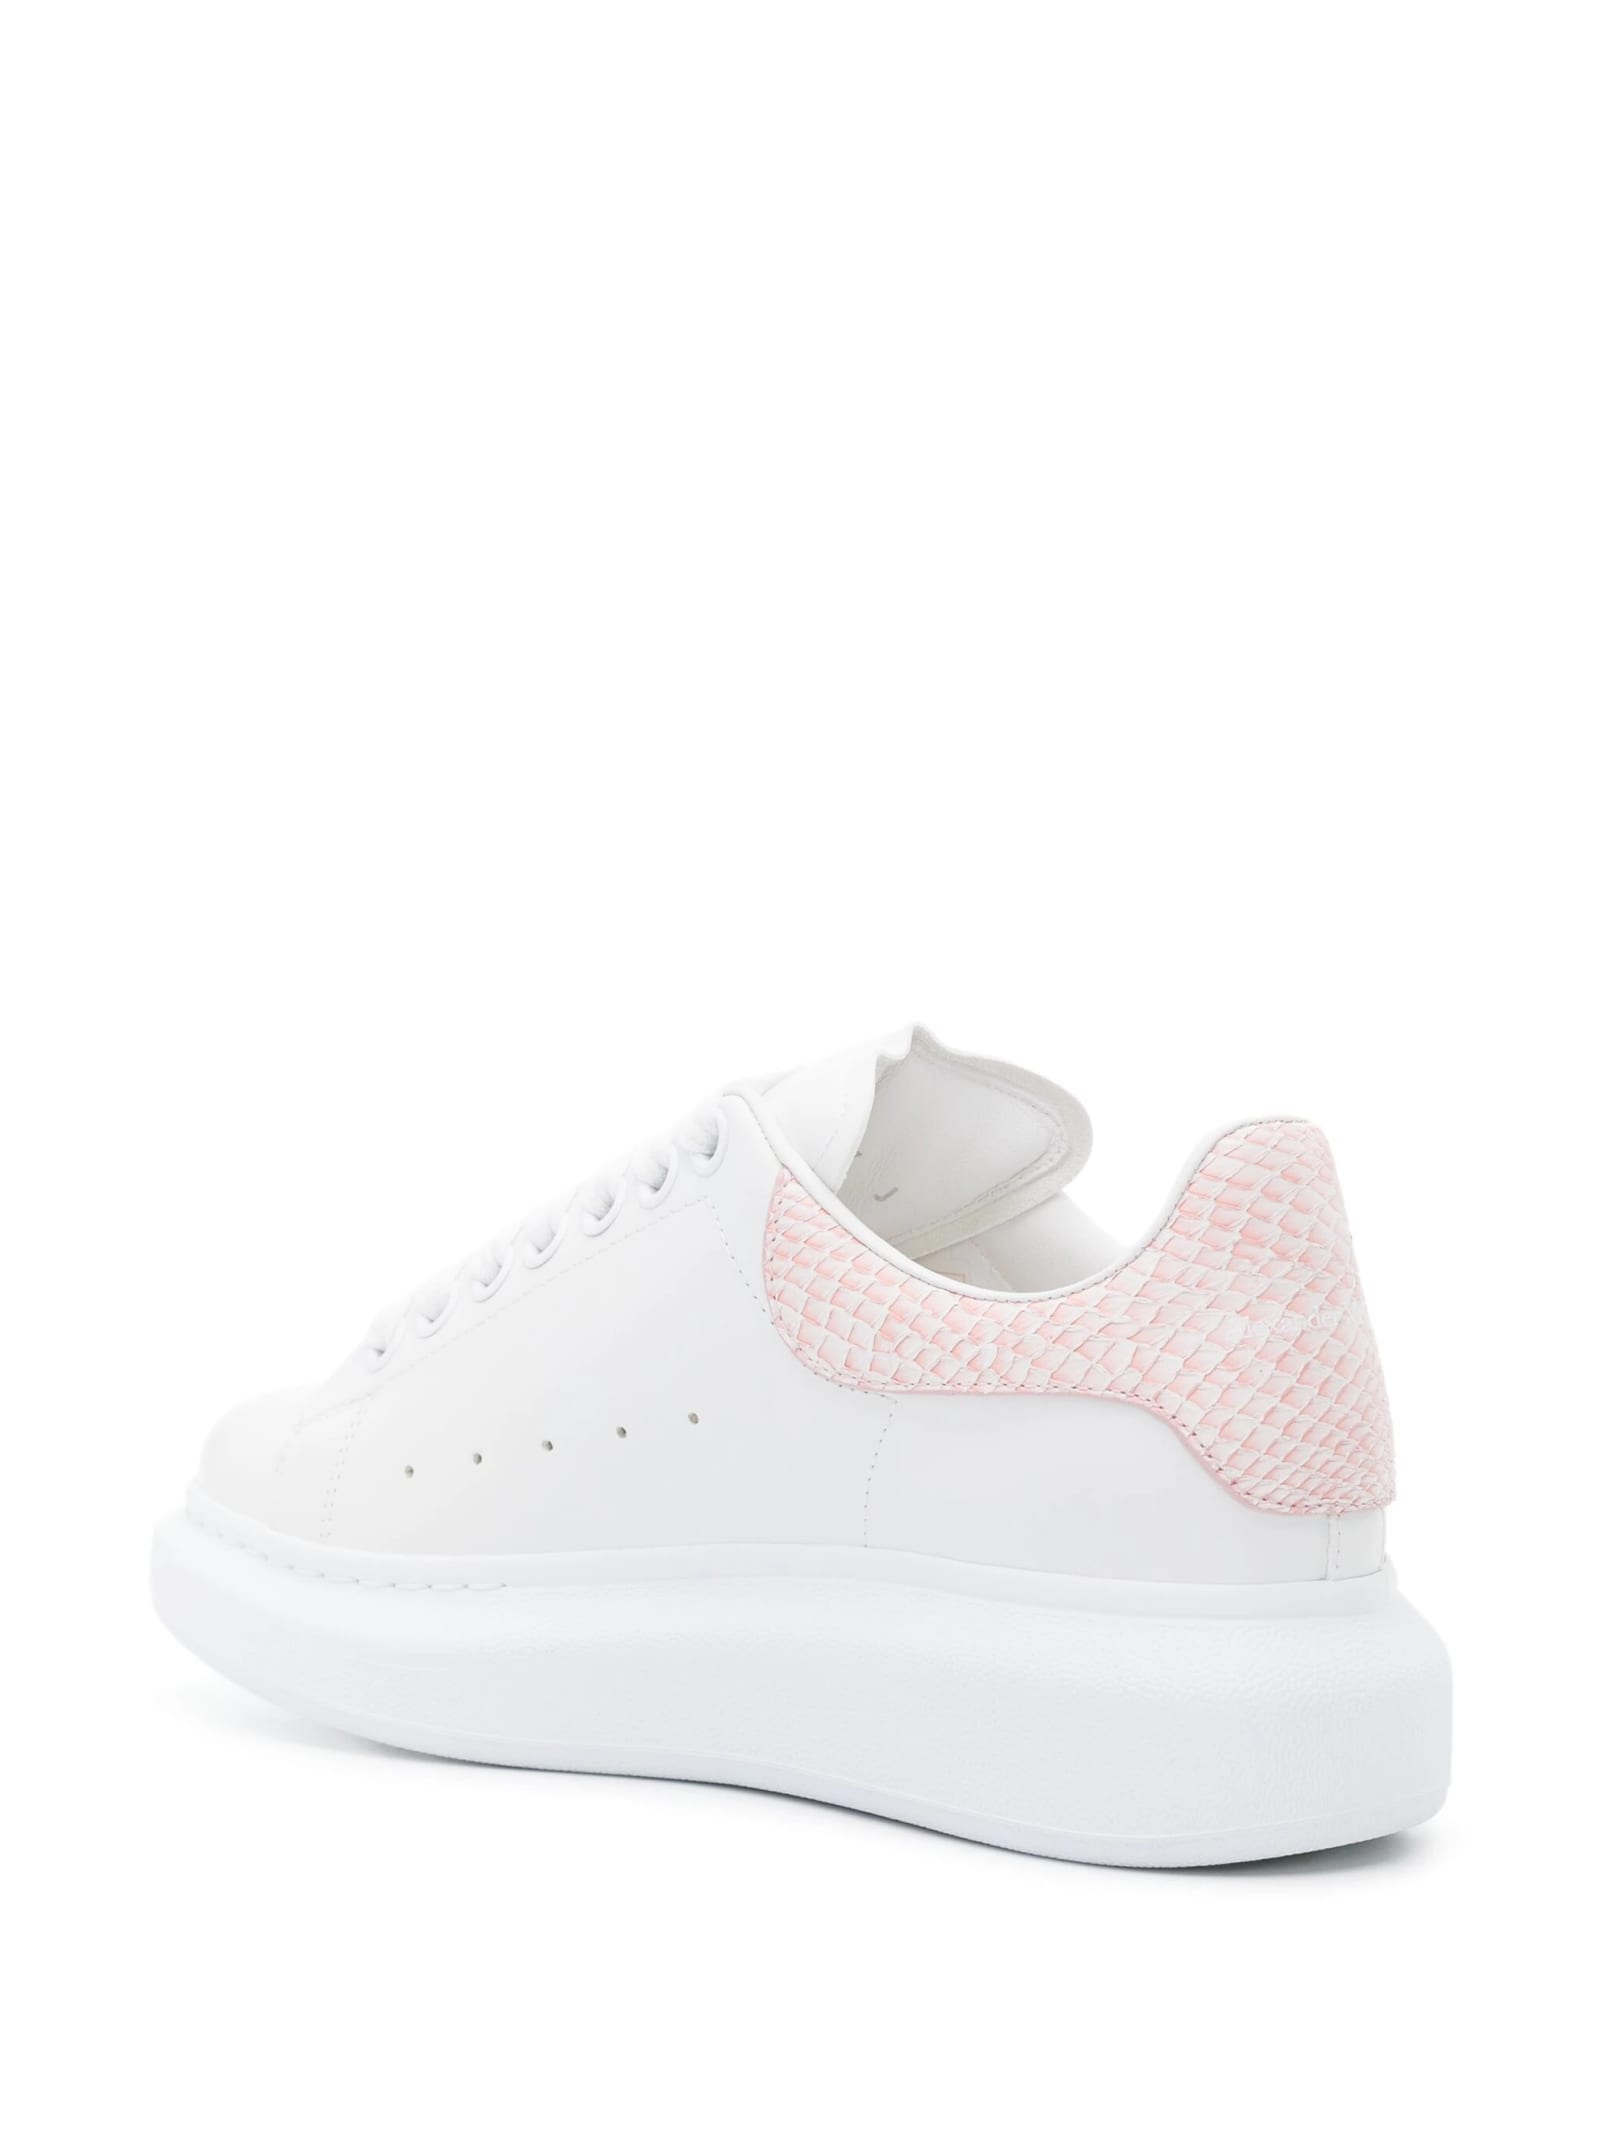 Shop Alexander Mcqueen White Oversized Sneakers With Powder Pink Python Spoiler